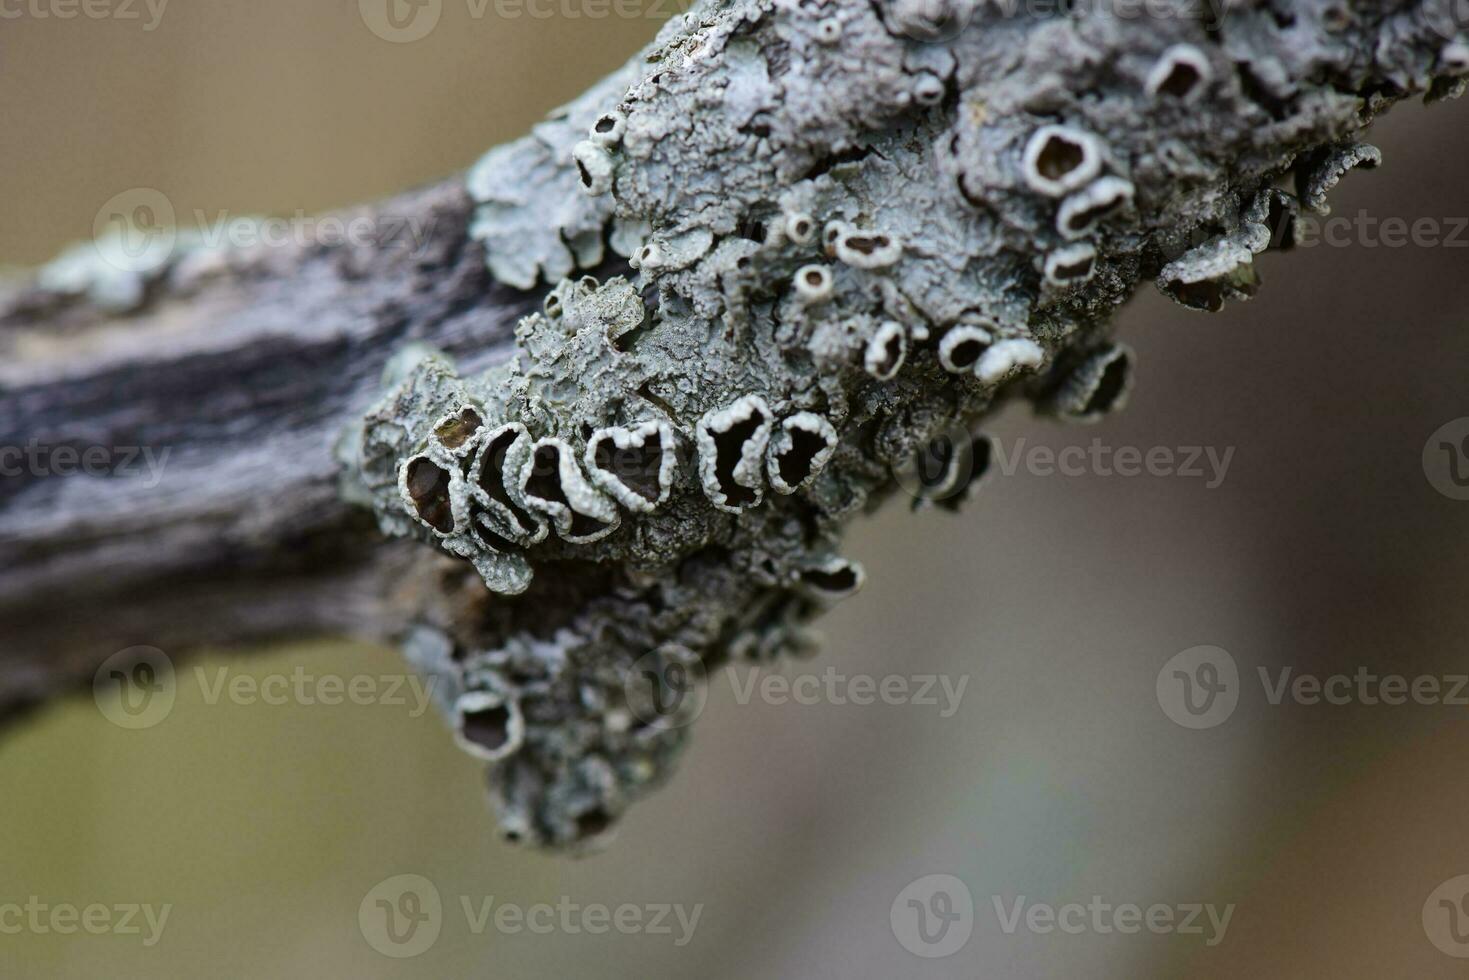 Lichens attached to a tree branch, La Pampa Province, Patagonia, Argentina. photo